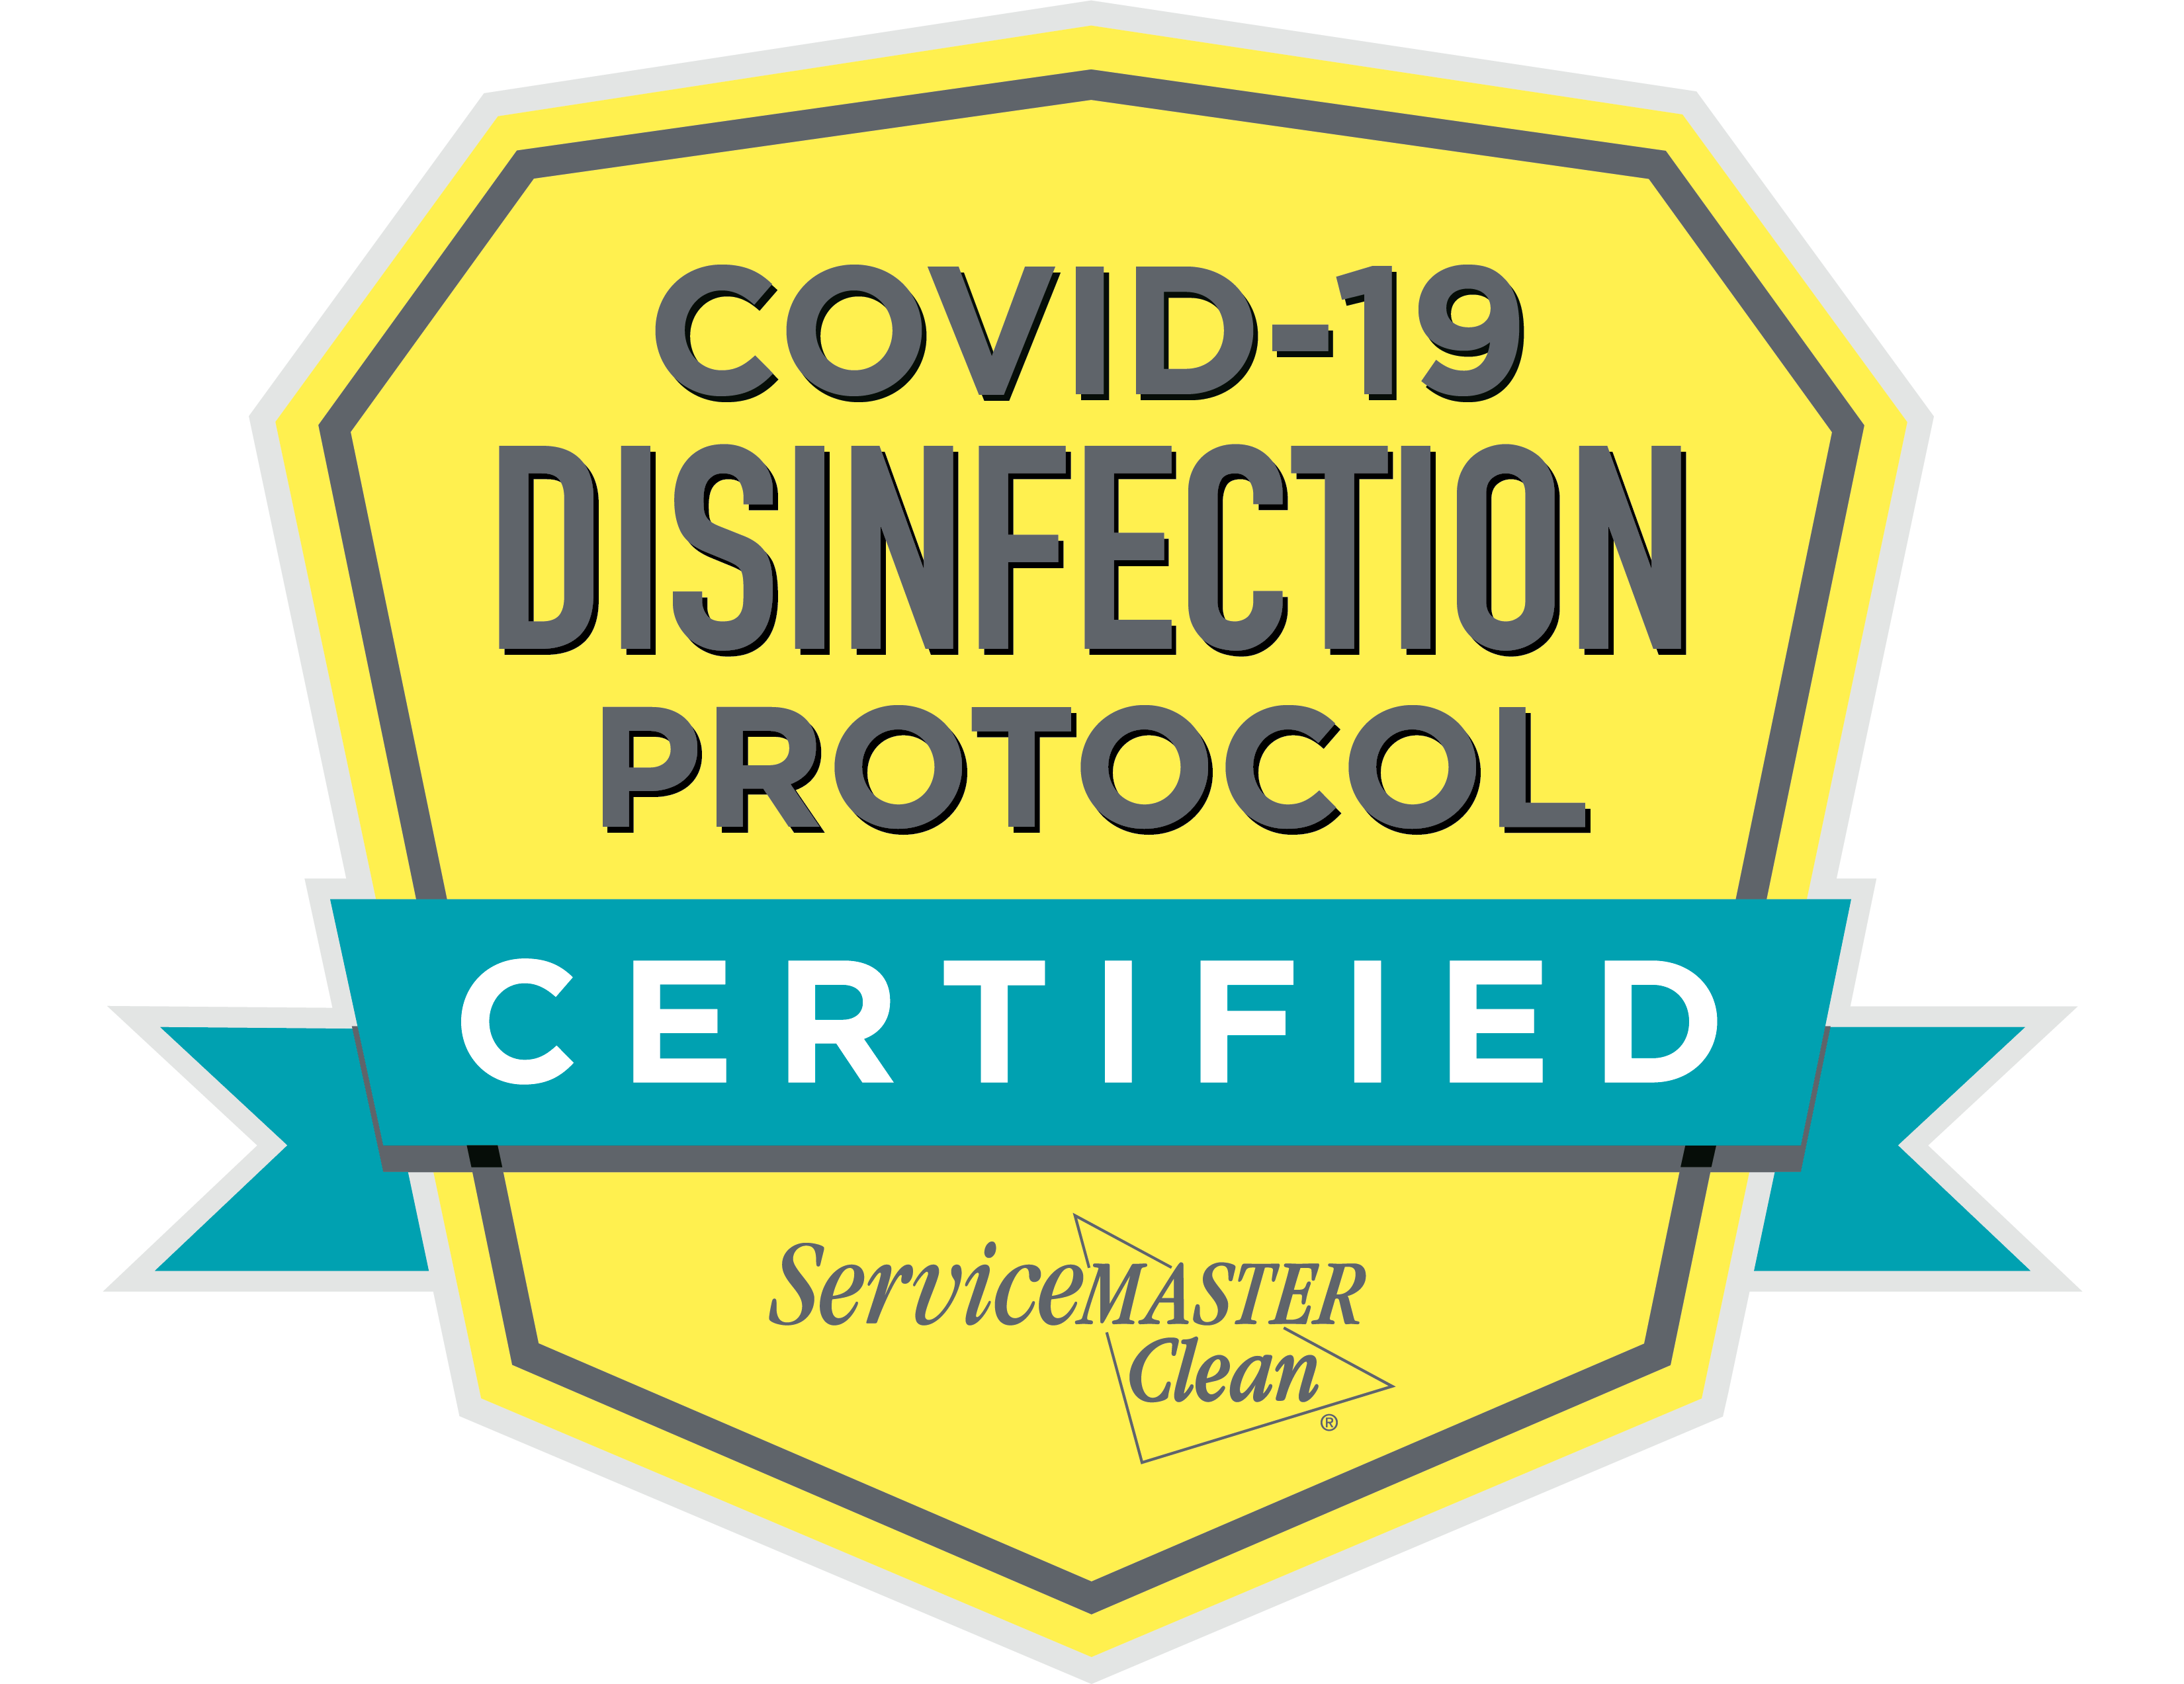 COVID-19 Disinfection Protocol Certified